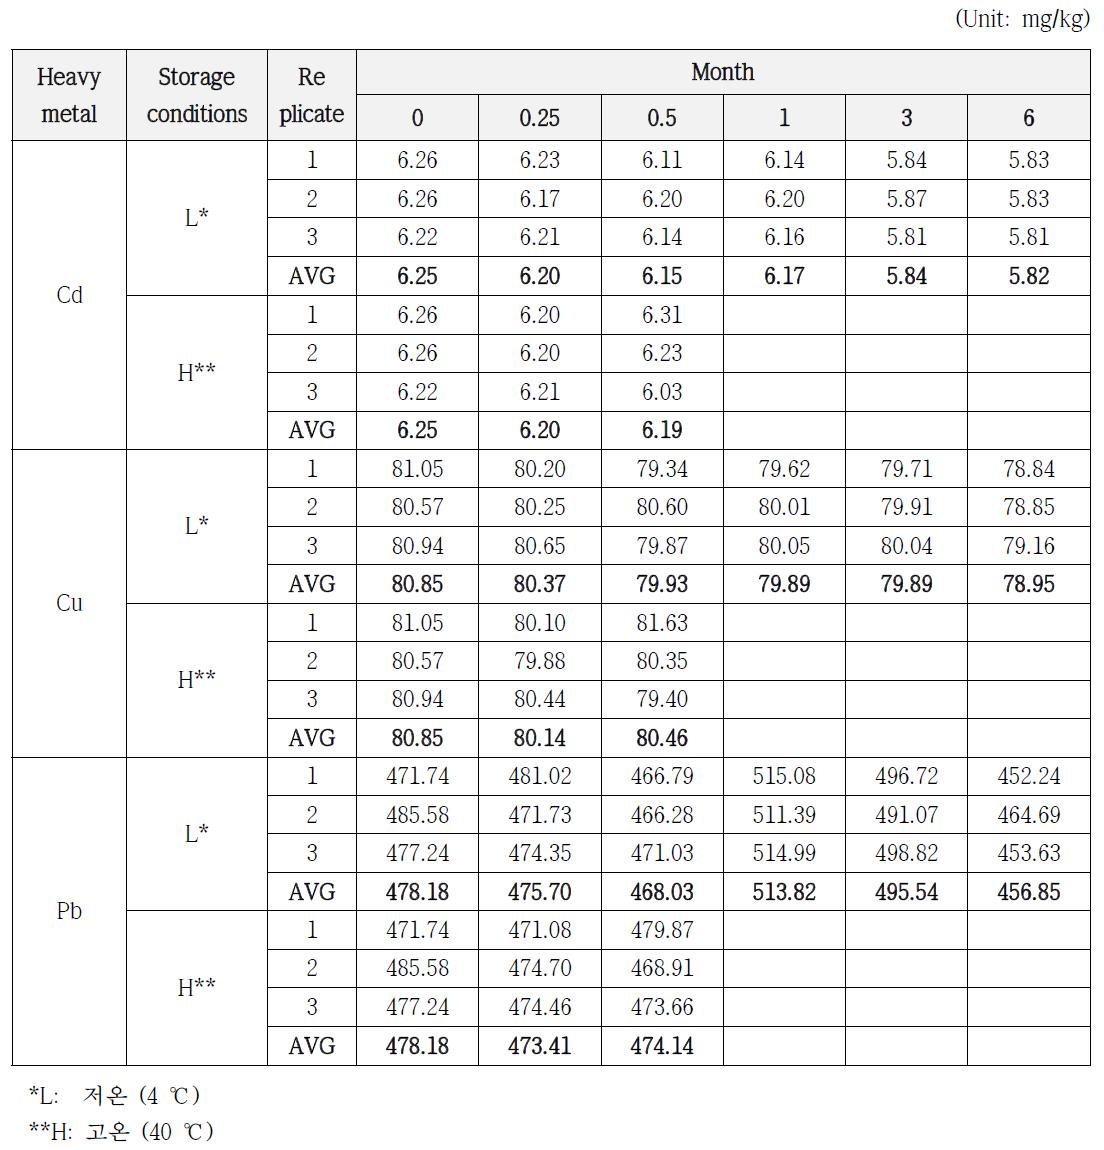 Result of stability study for Cadmium, Copper and Lead in soil PTMs of Metal-Ⅰ